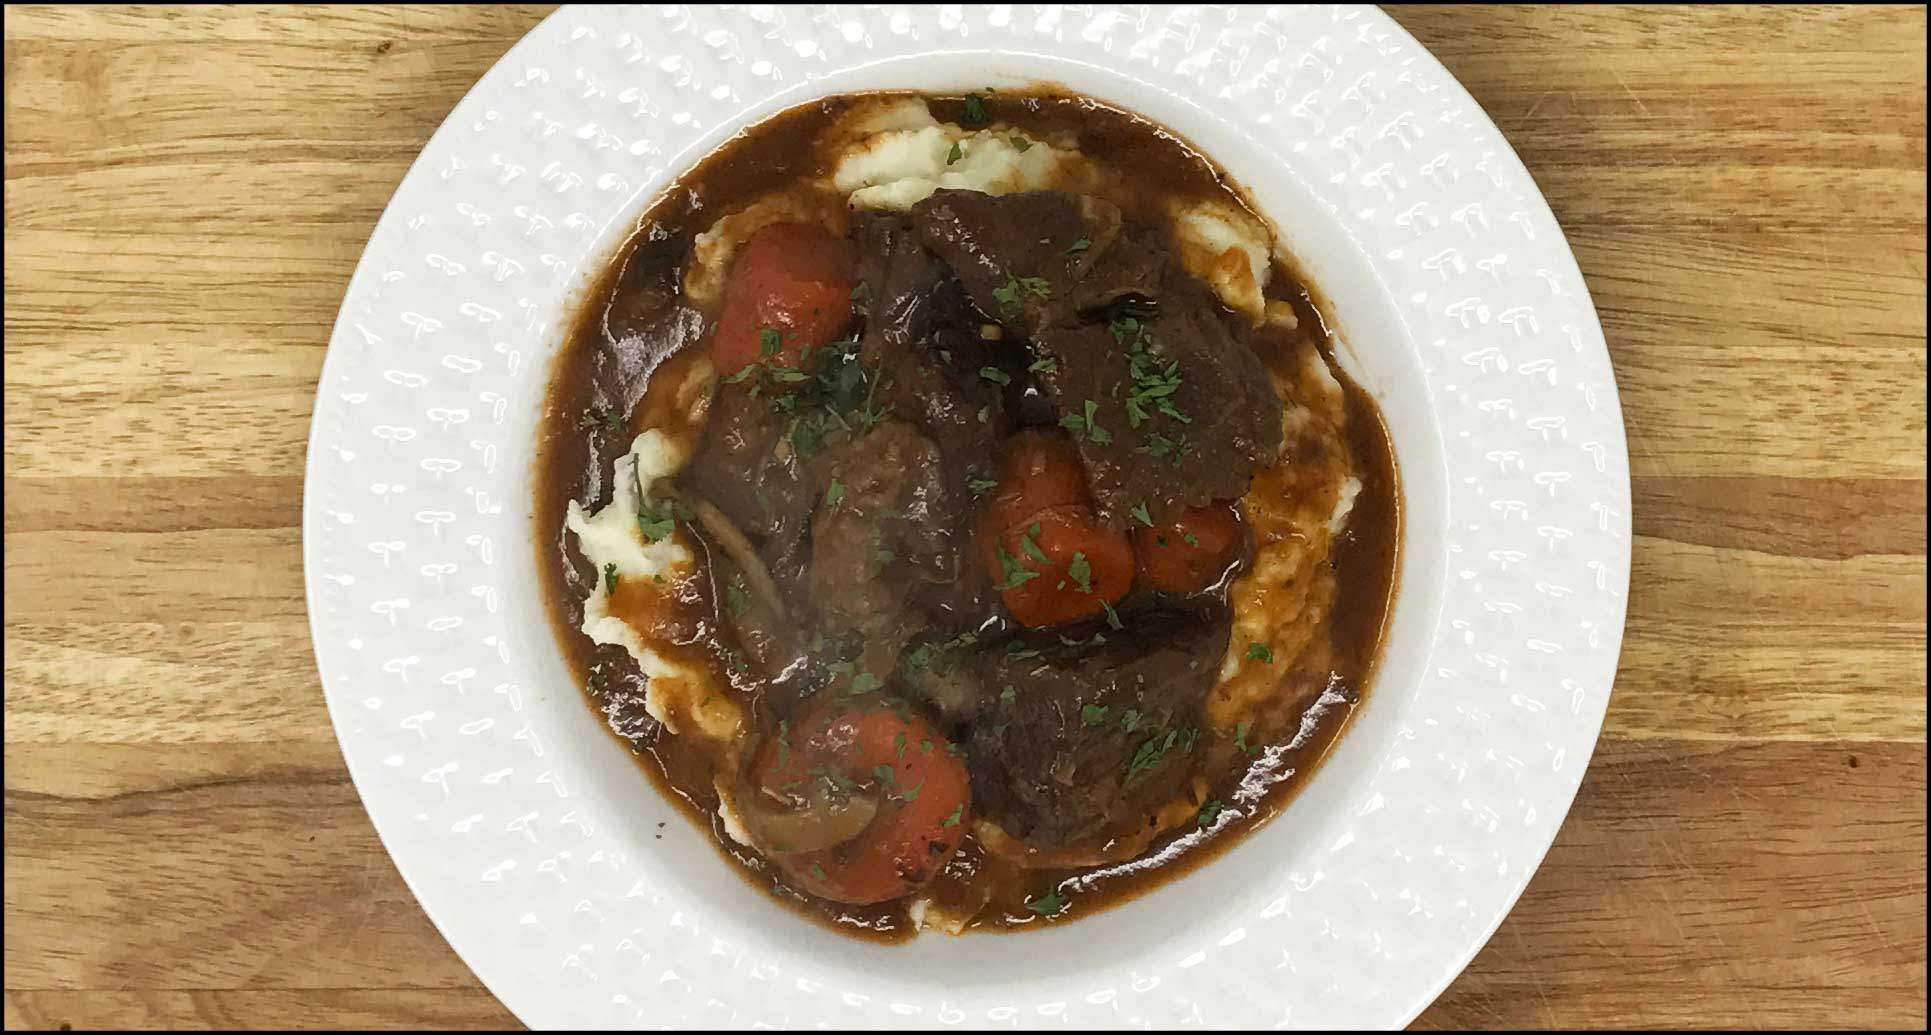 White plate of Beef Bourguignon and vegetables, a family recipe